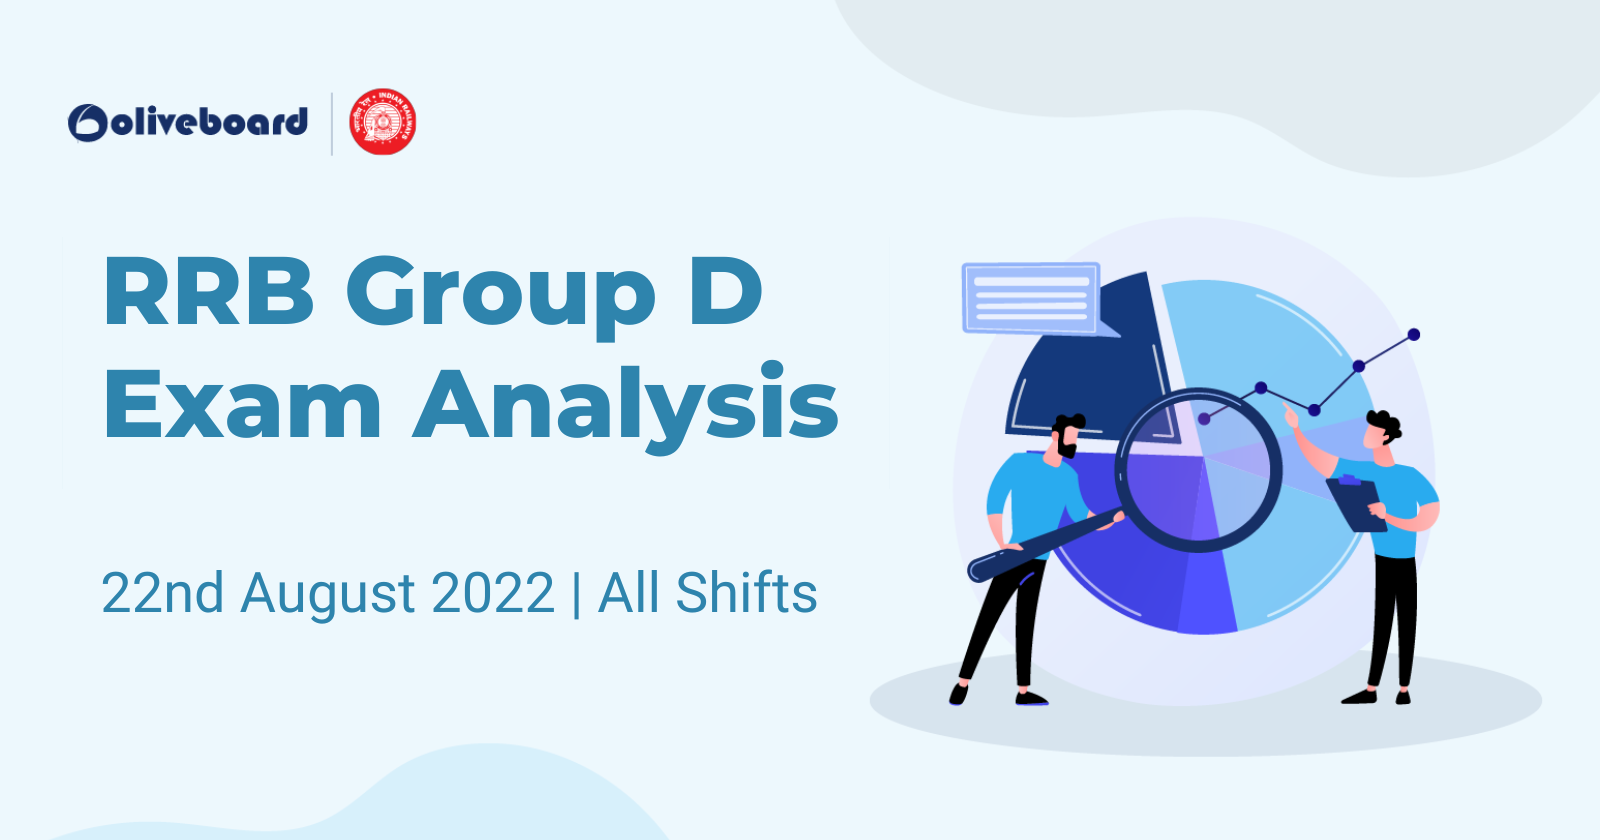 RRB Group D Exam Analysis - 22nd August 2022